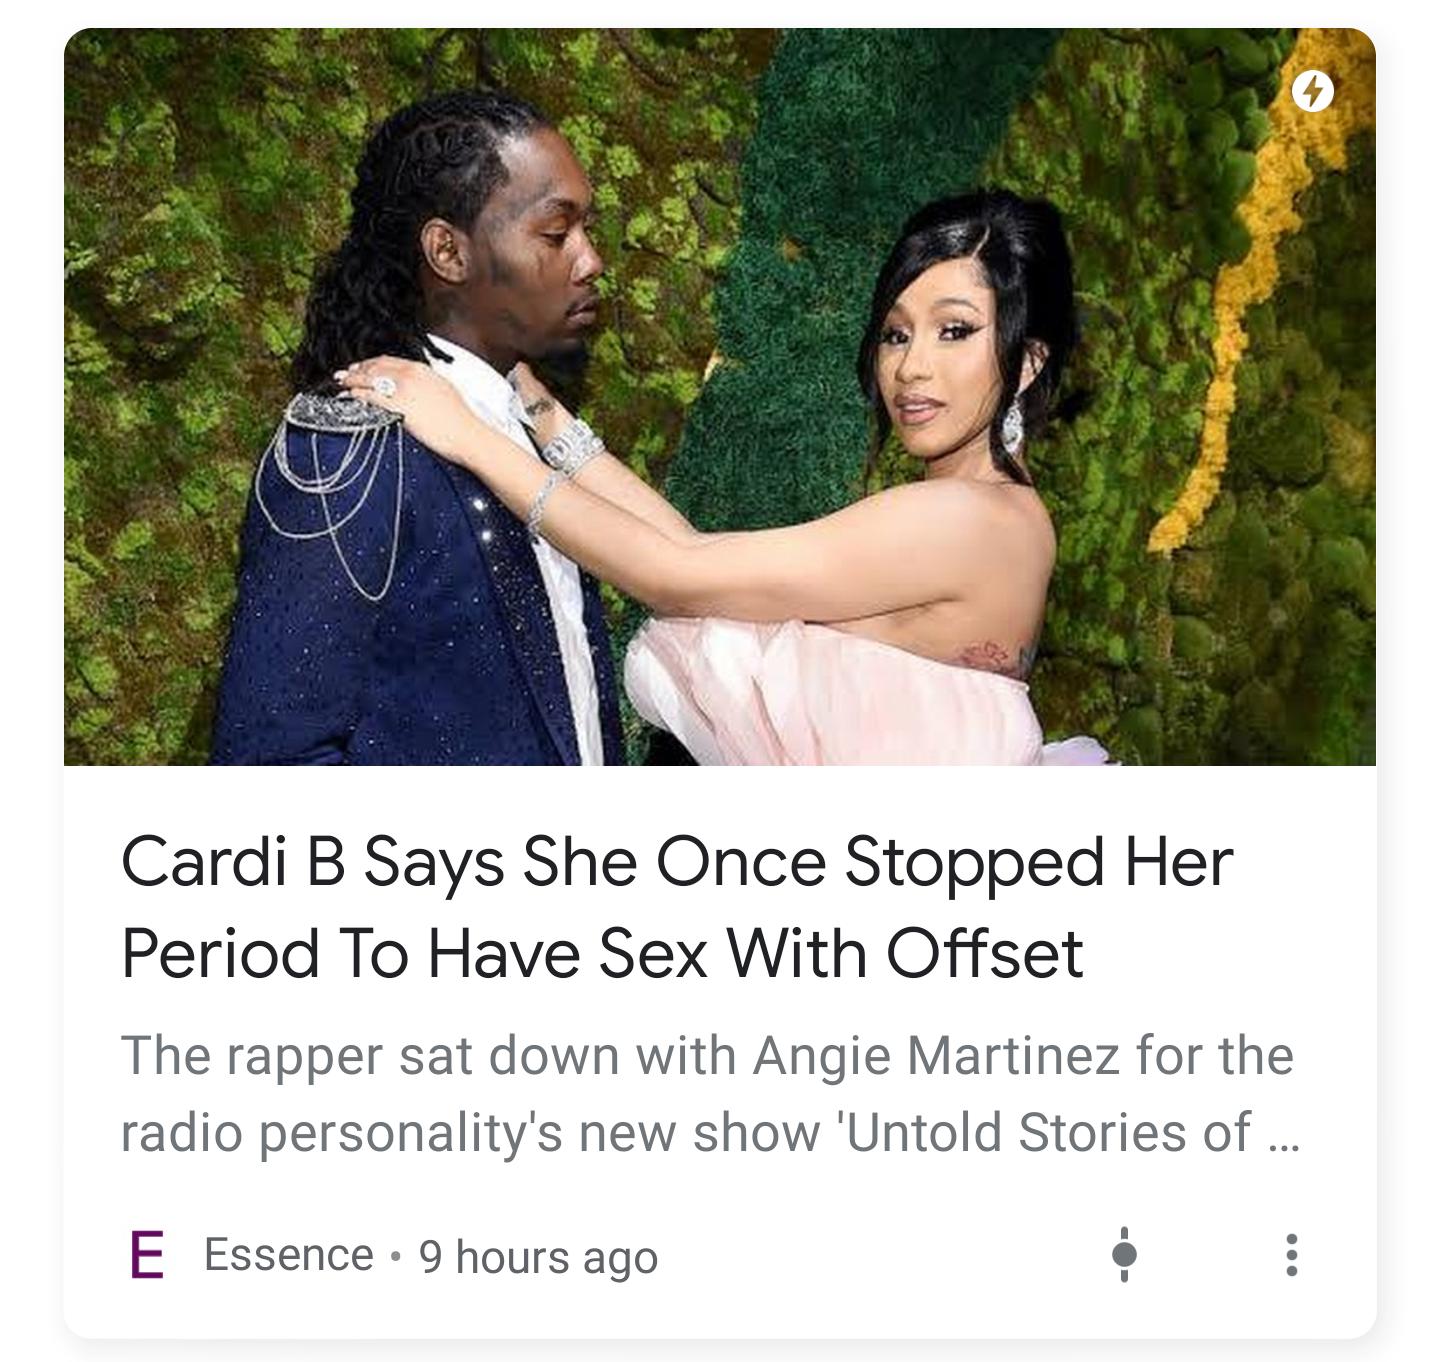 cardi b and offset - Cardi B Says She Once Stopped Her Period To Have Sex With Offset The rapper sat down with Angie Martinez for the radio personality's new show 'Untold Stories of ... E Essence 9 hours ago